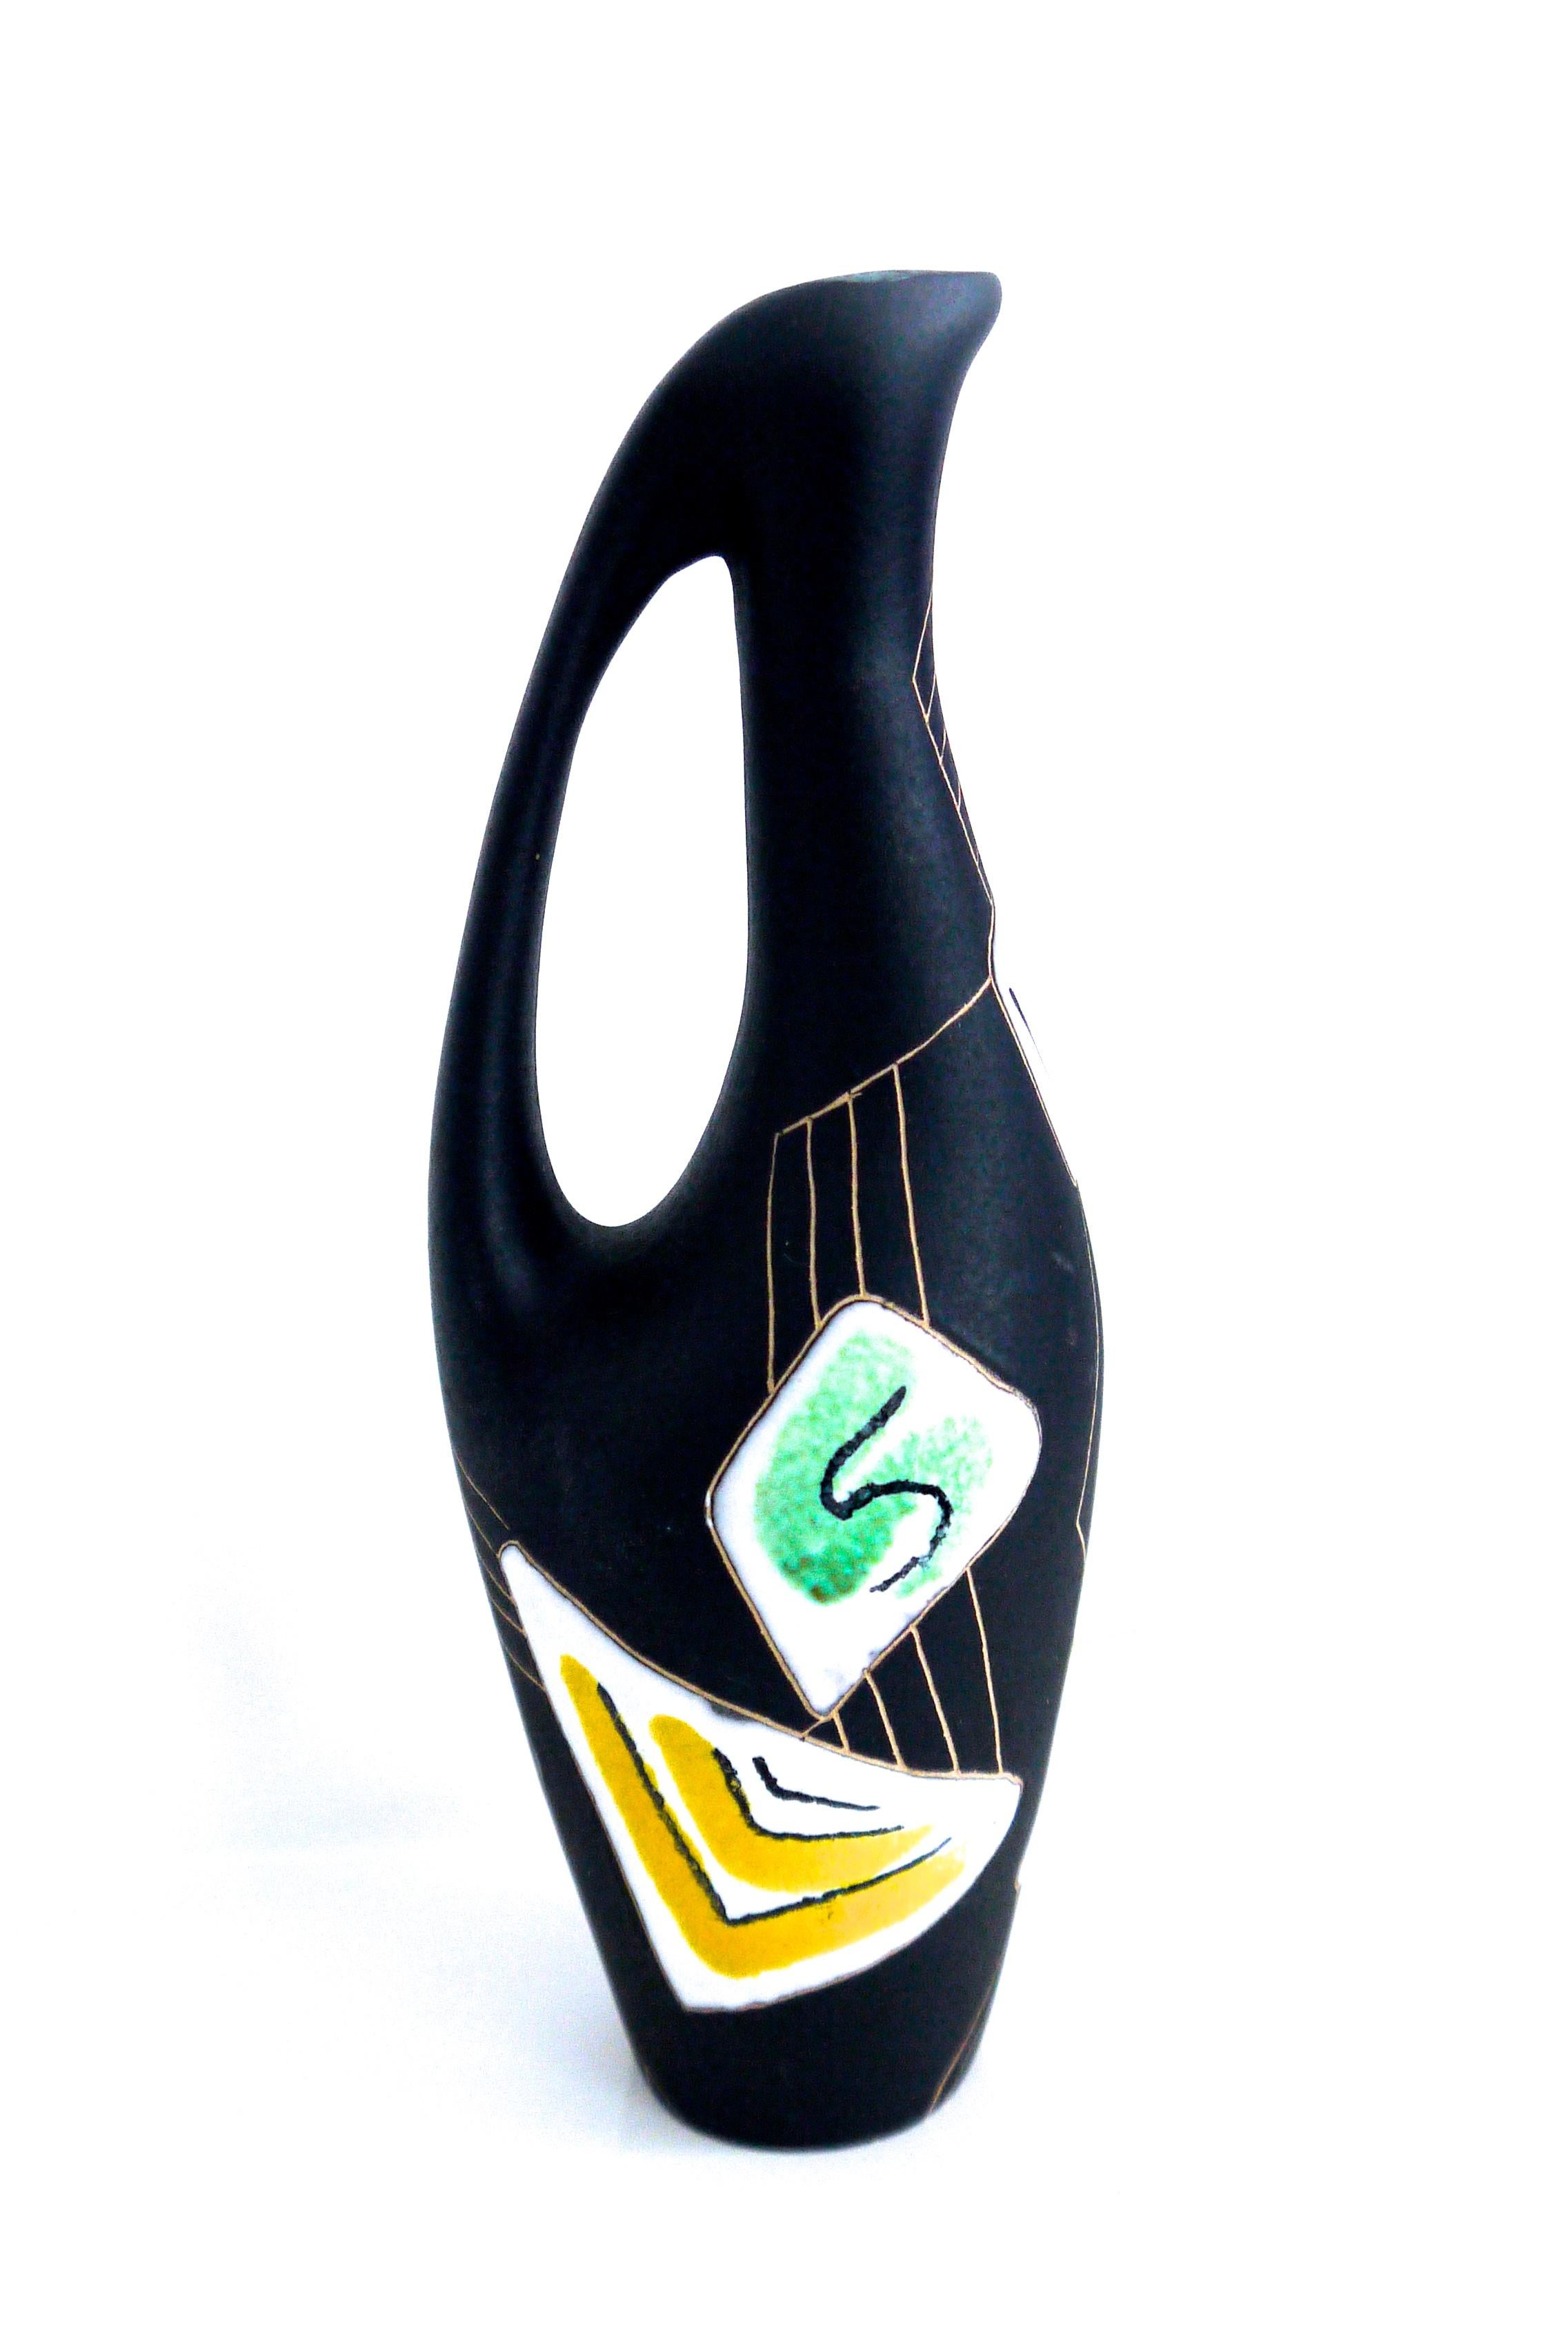 German Modernist hand painted ceramic pitcher (small) 'Morroco' design 1950s for Ruscha ceramic. Hand painted with black matte glaze as background. The second vase (purchased separately) is fired glaze and glossy made in Germany label to base